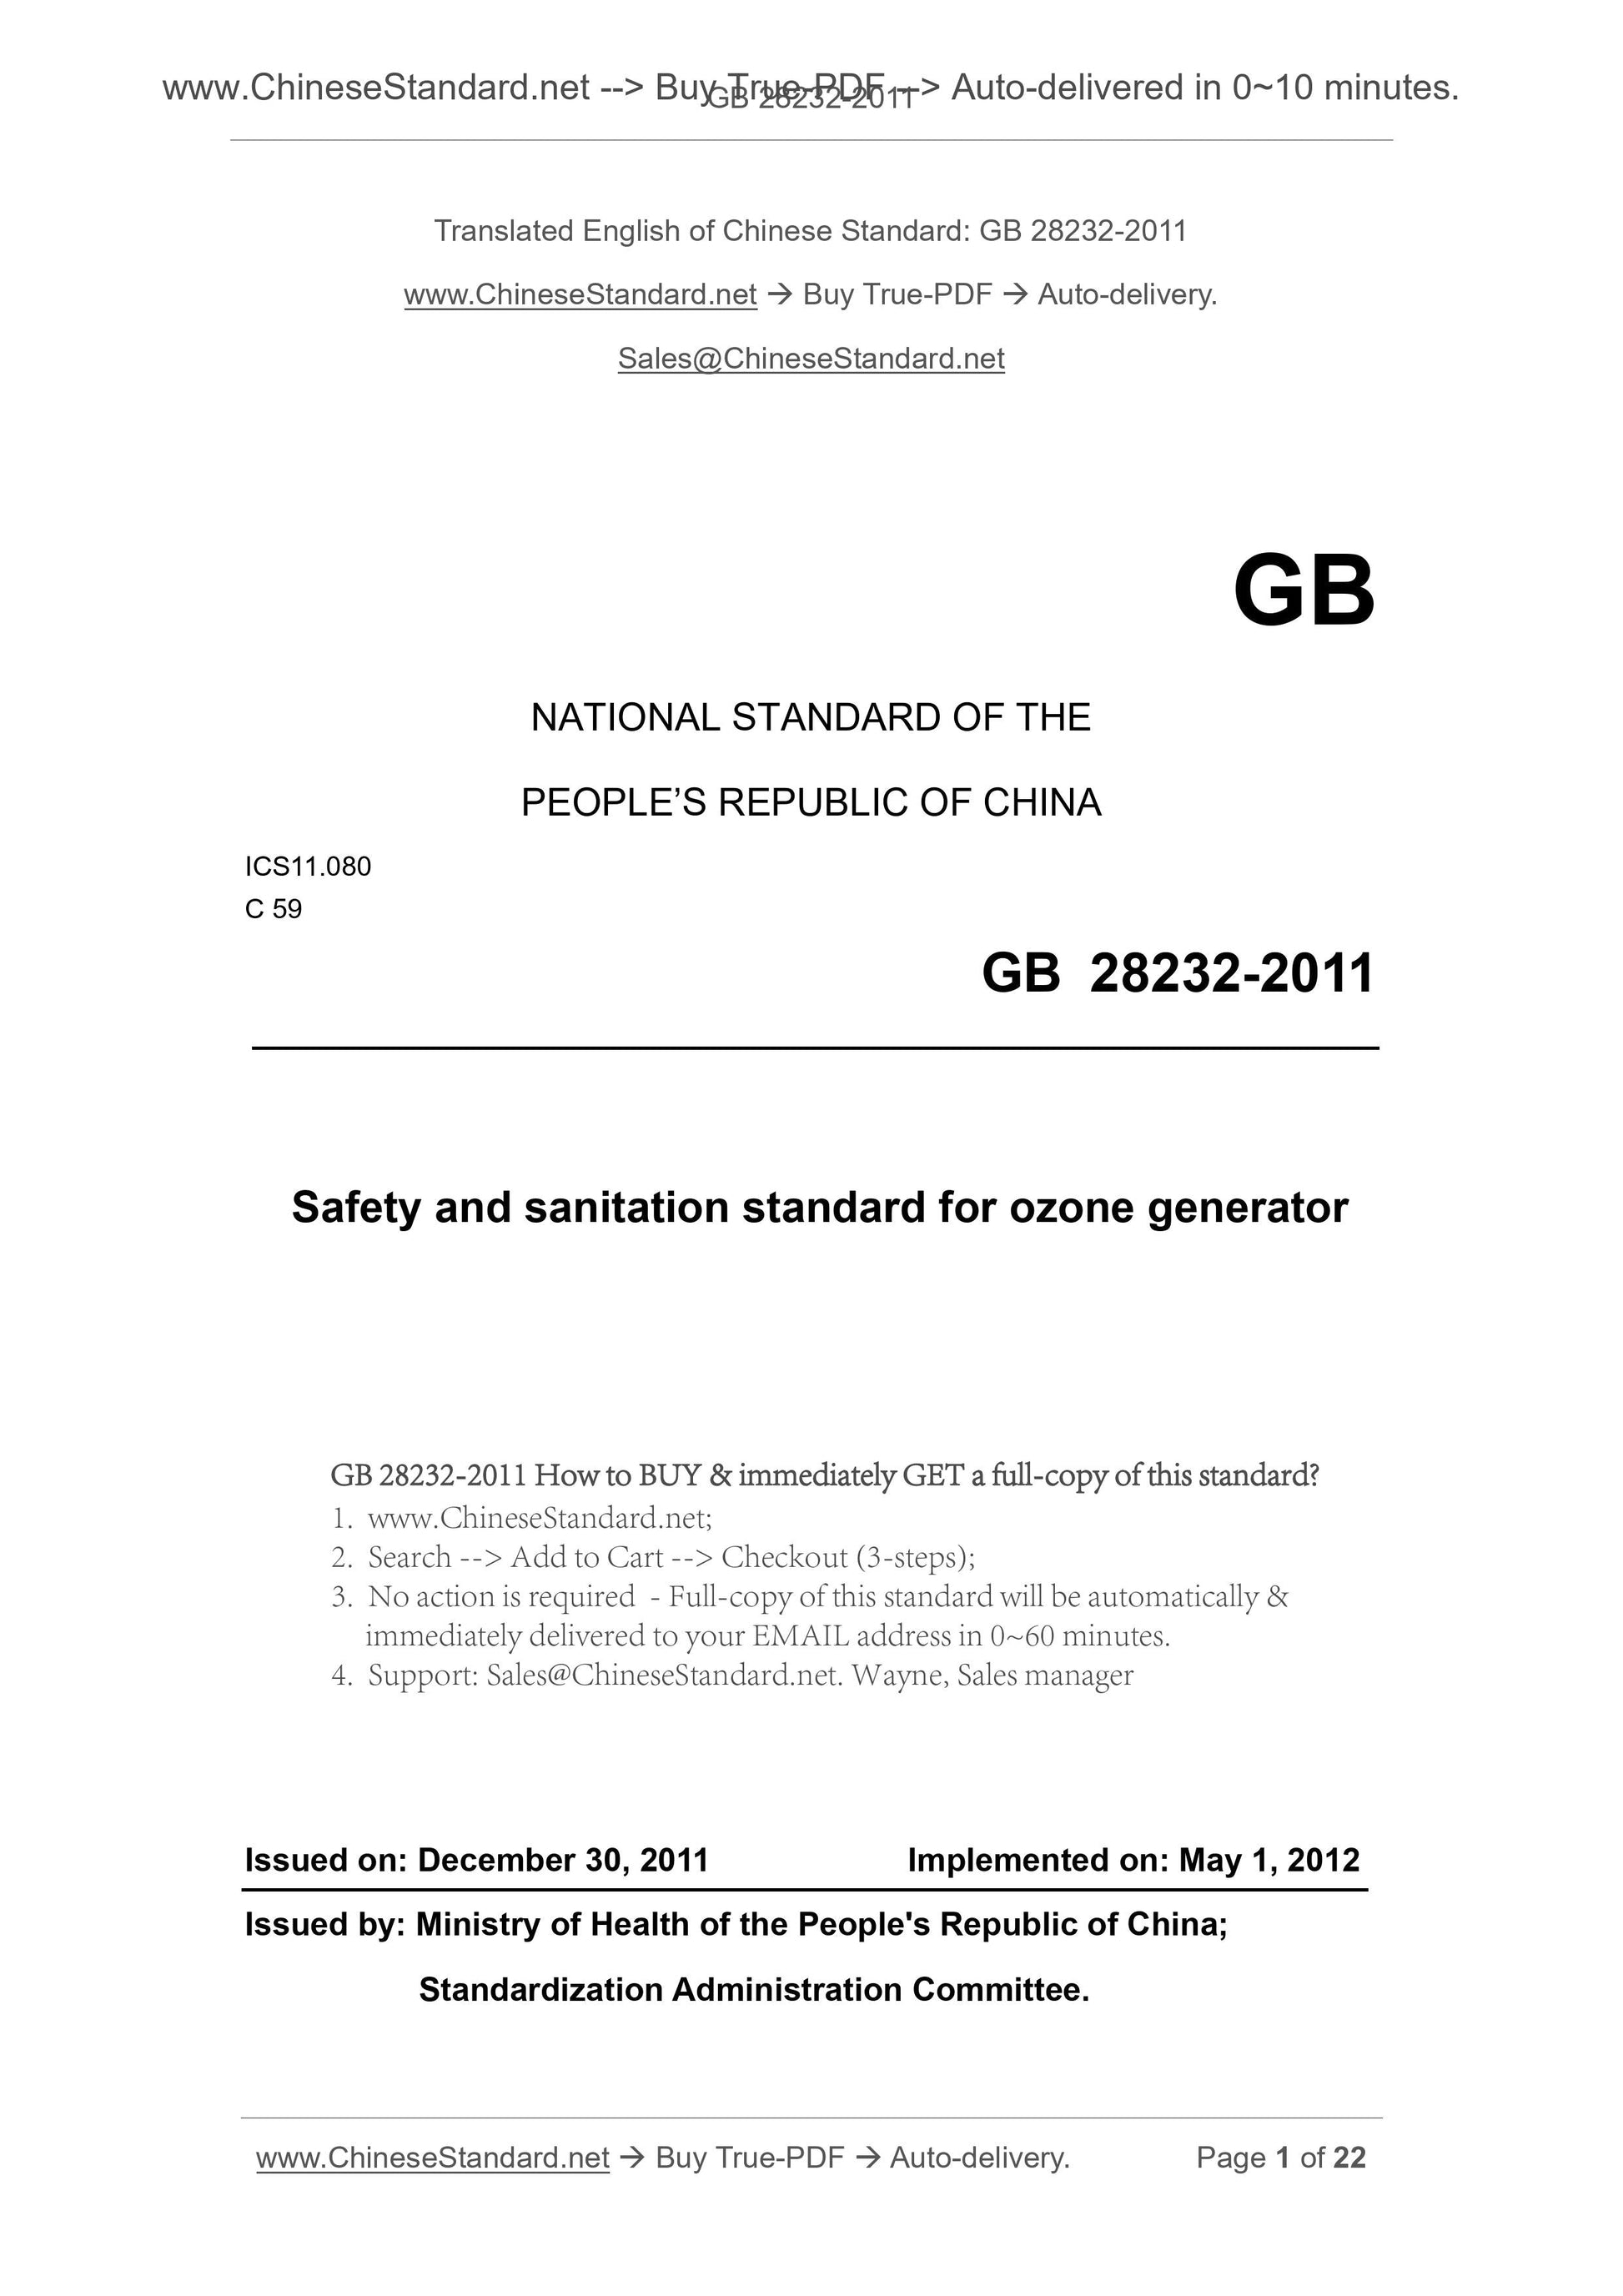 GB 28232-2011 Page 1